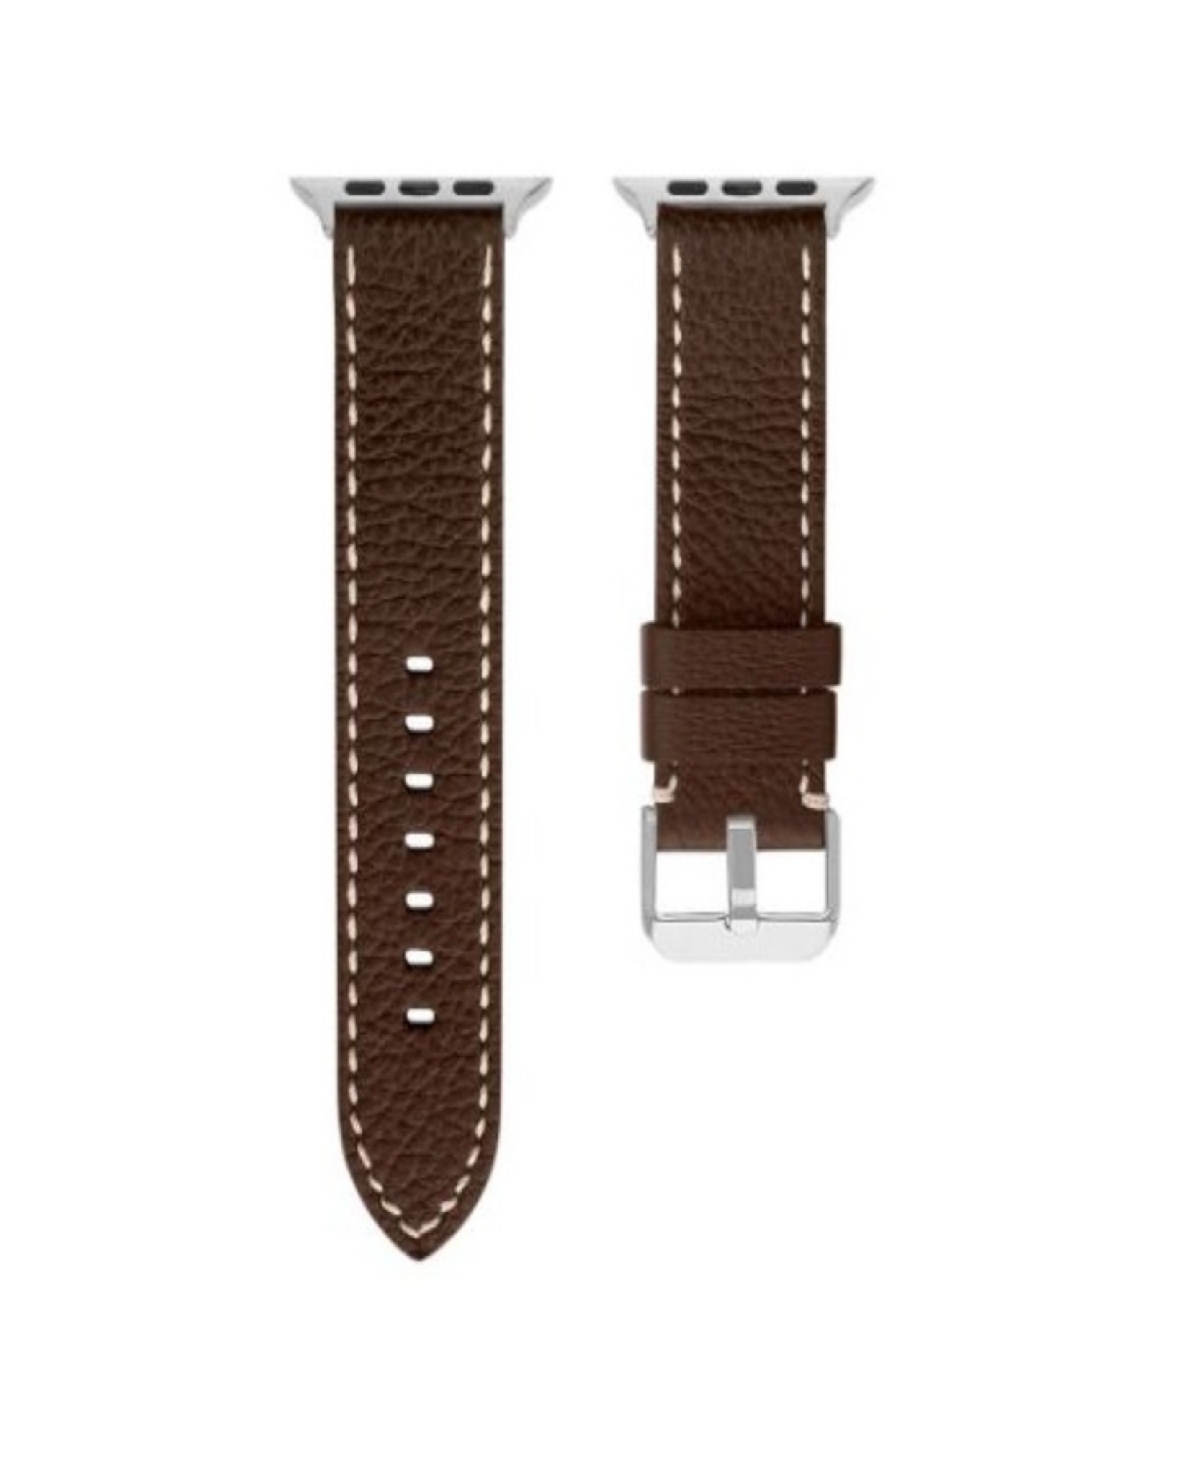 American Exchange Men's Brown Polyurethane Leather Strap Compatible For 42mm, 44mm Apple Watch